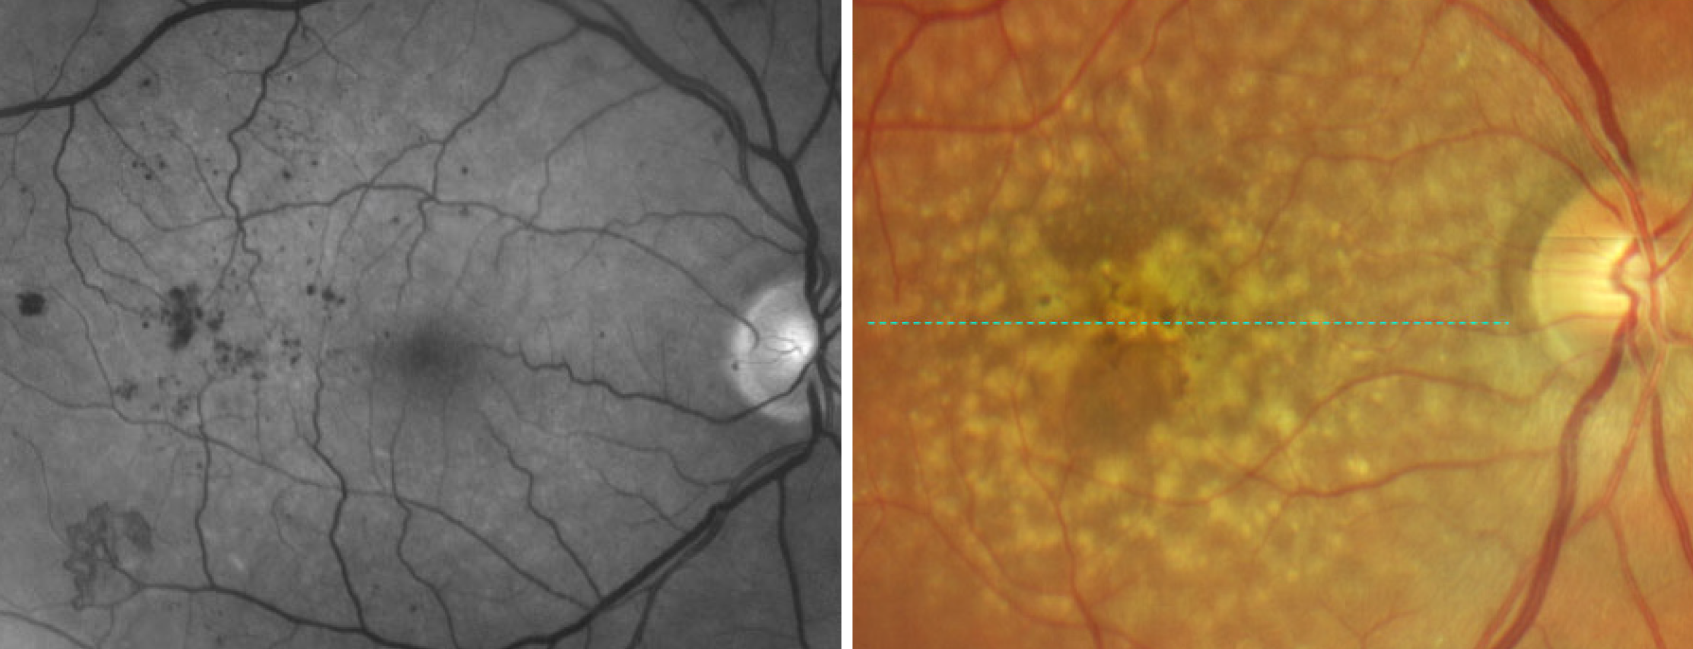 Milder DR at baseline was associated with increased risk of AMD.